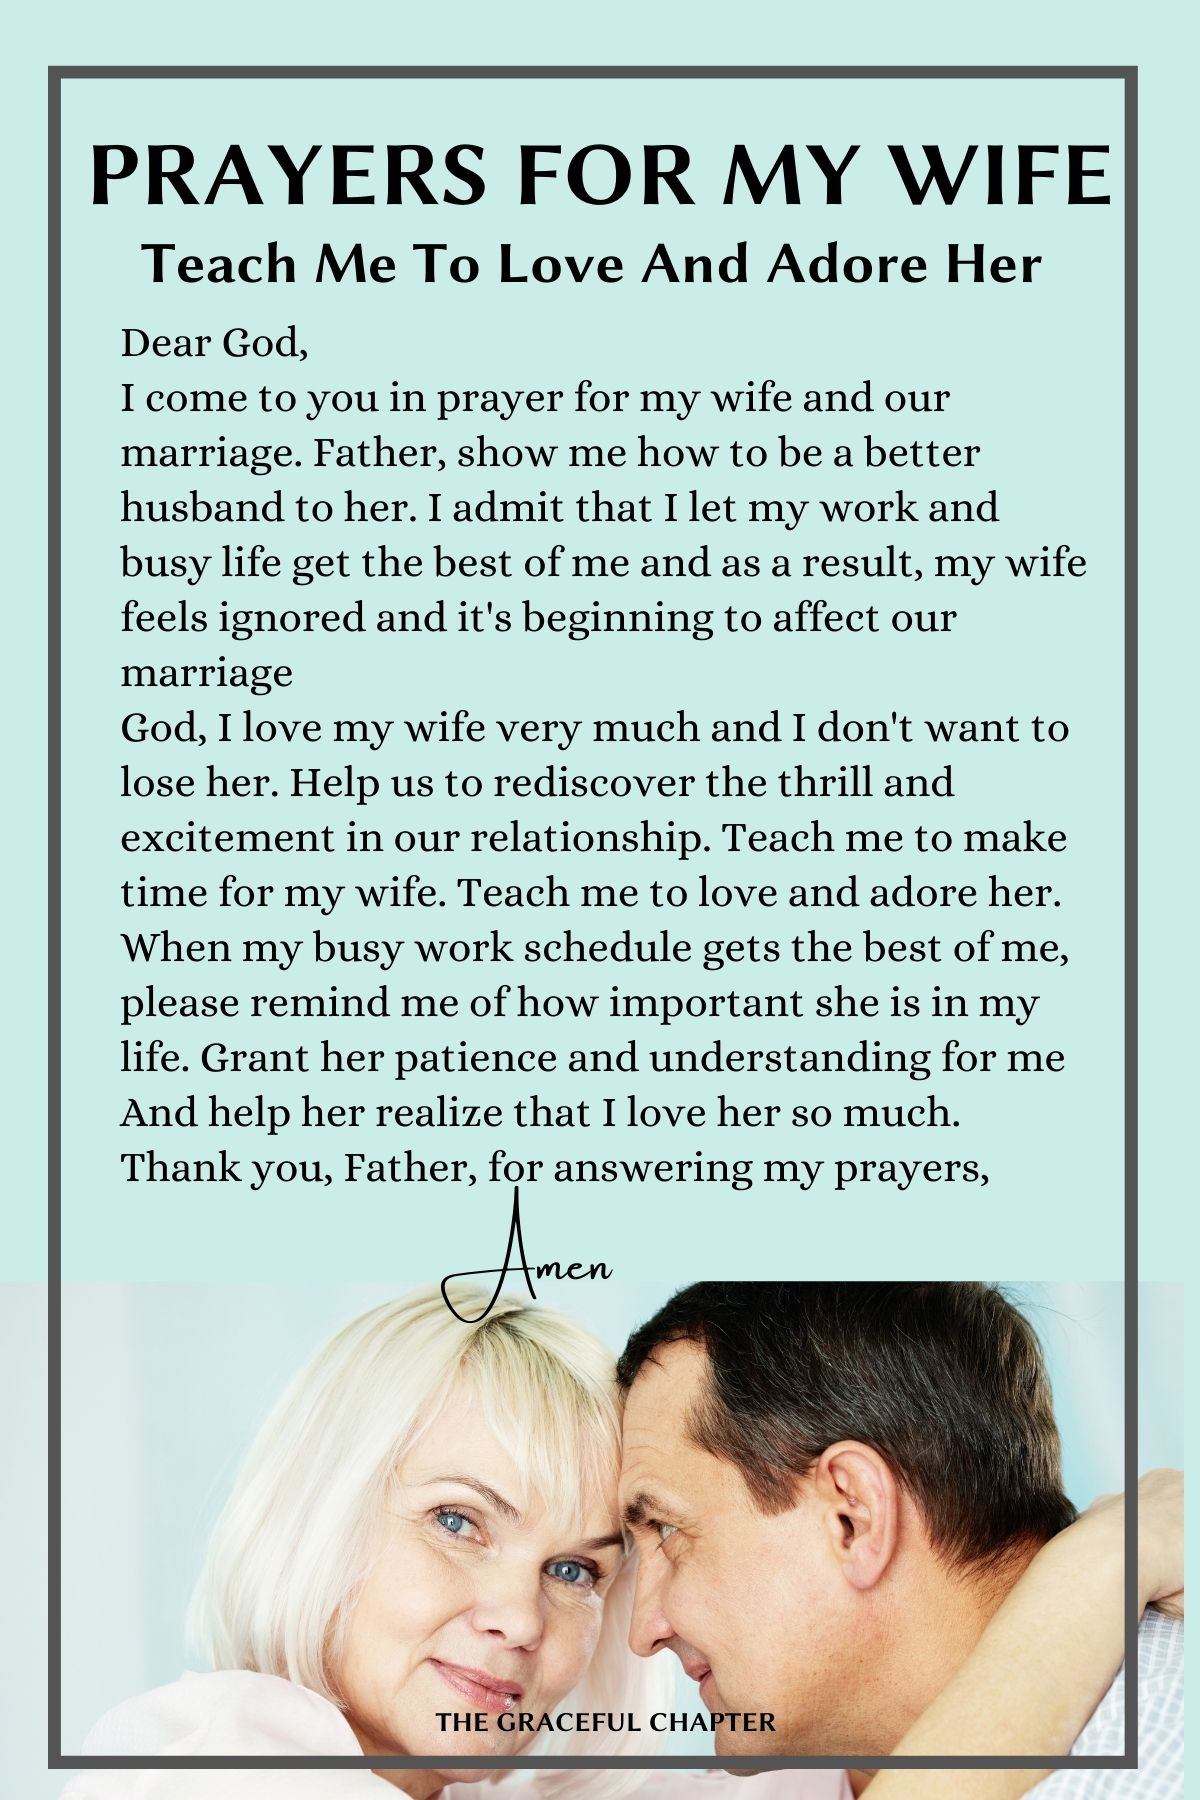 Prayers for your wife - Teach me to love and adore her